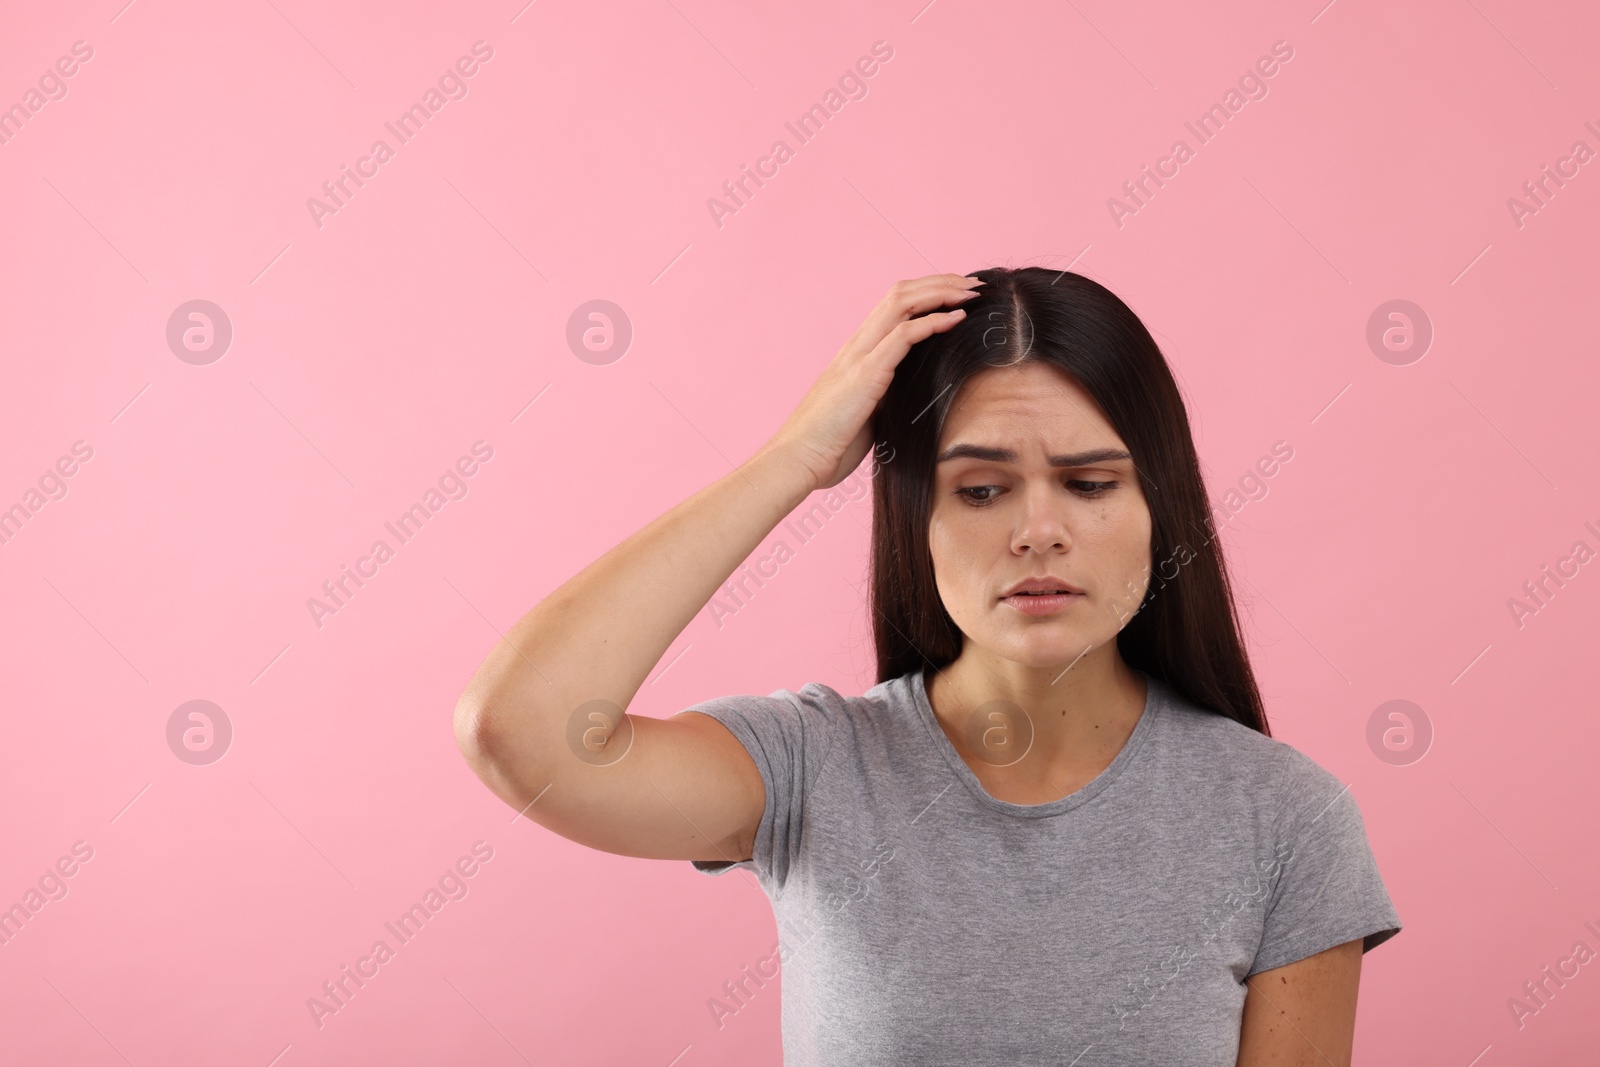 Photo of Emotional woman examining her hair and scalp on pink background, space for text